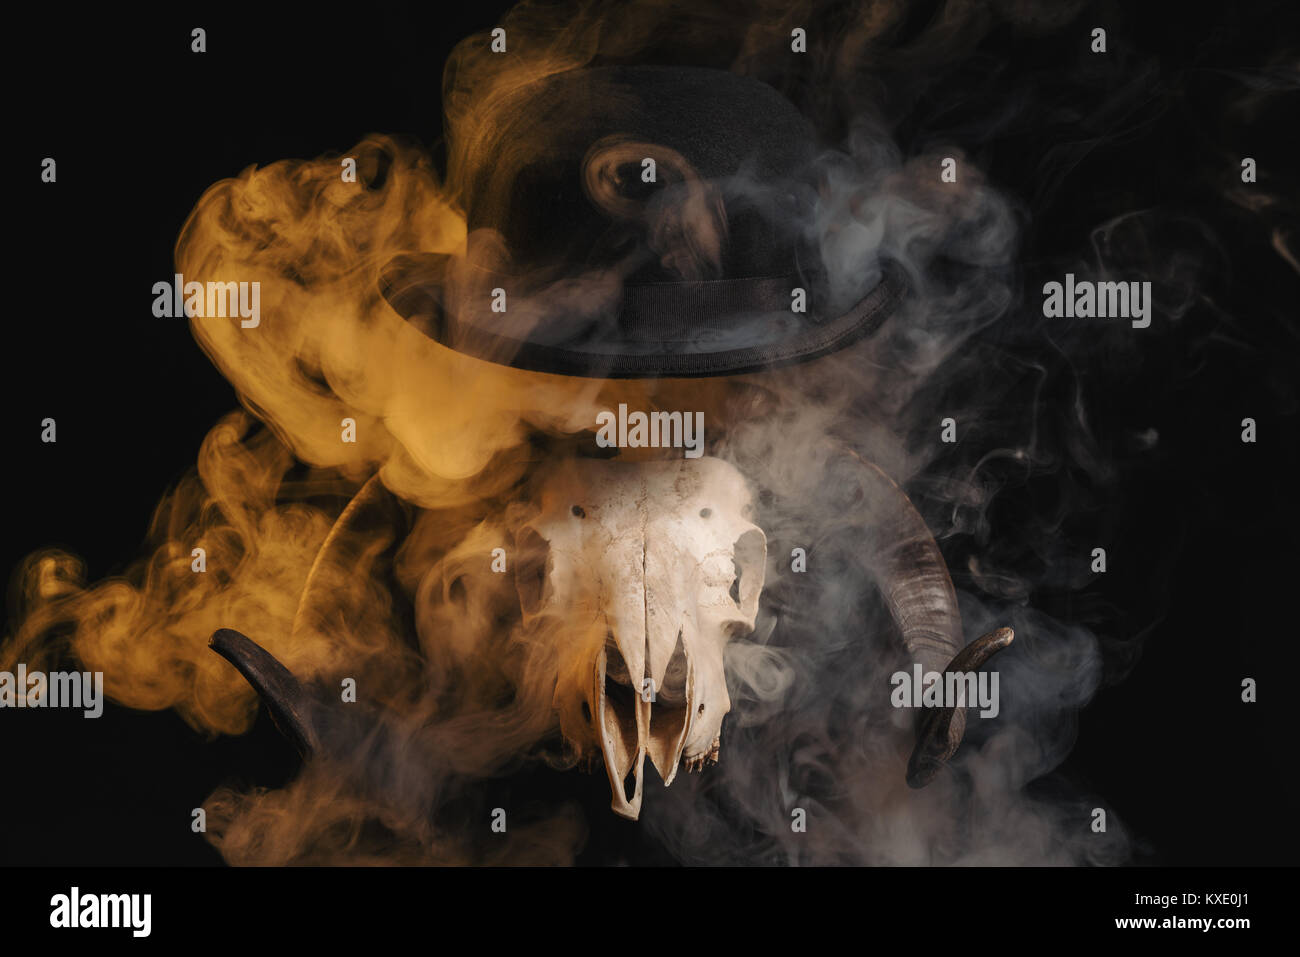 Ram skull with horns and a bowler hat on a smoky background Stock Photo